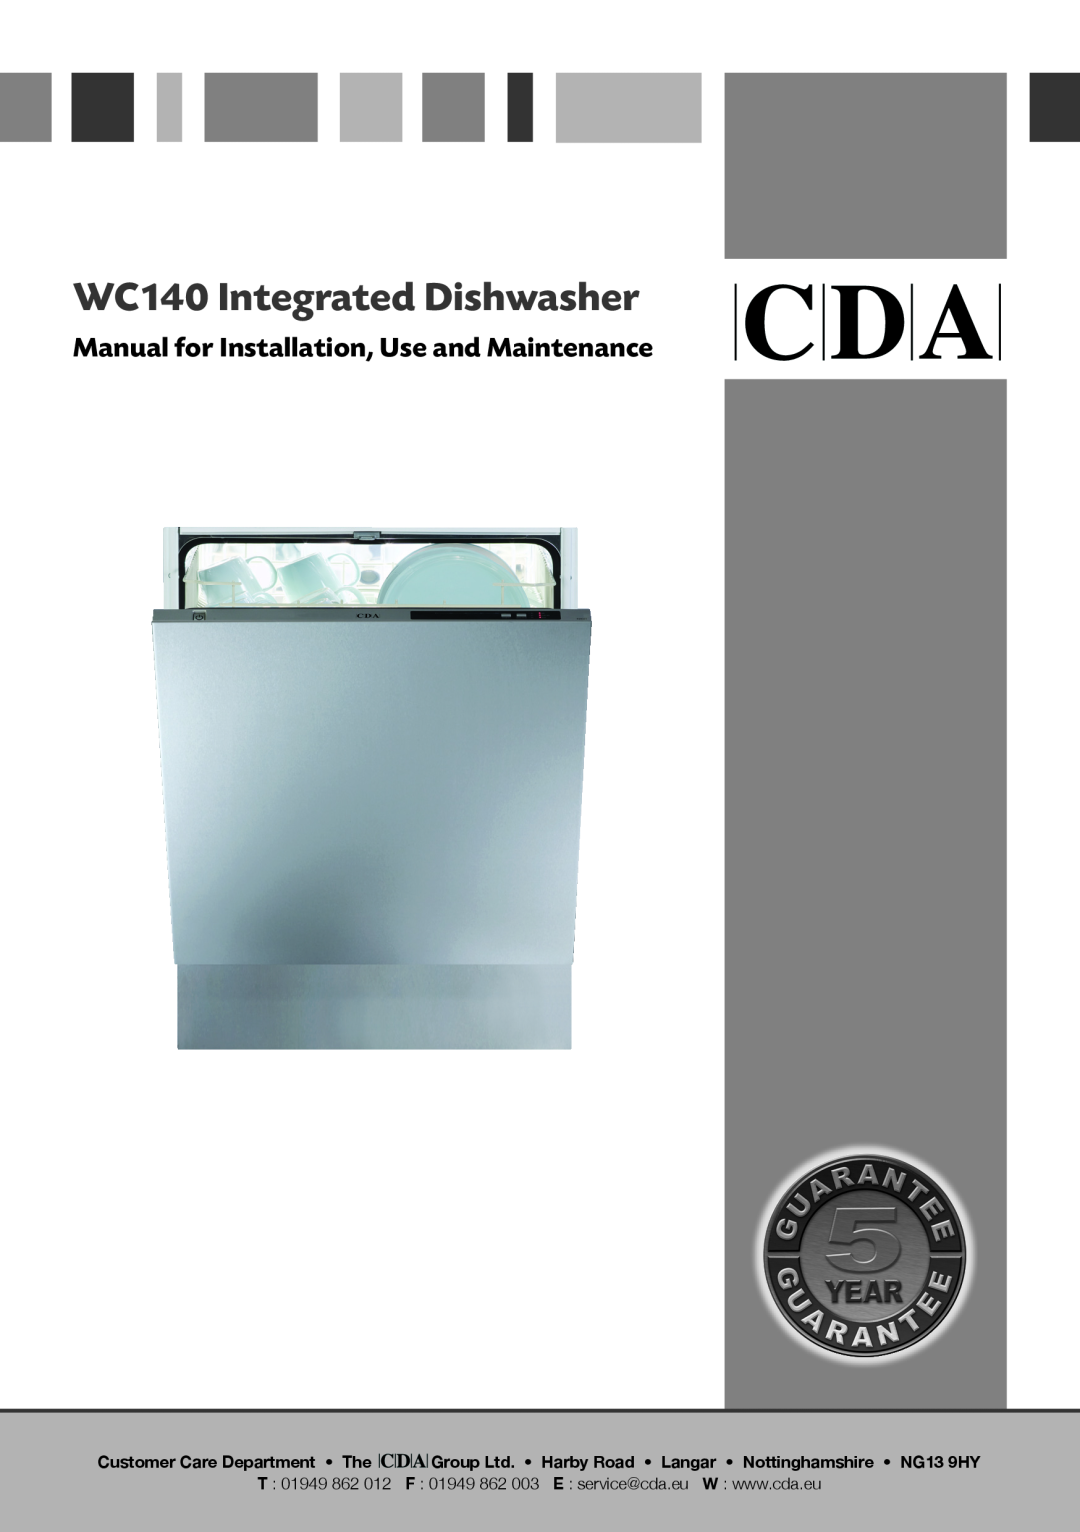 CDA manual WC140 Integrated Dishwasher, Manual for Installation, Use and Maintenance 